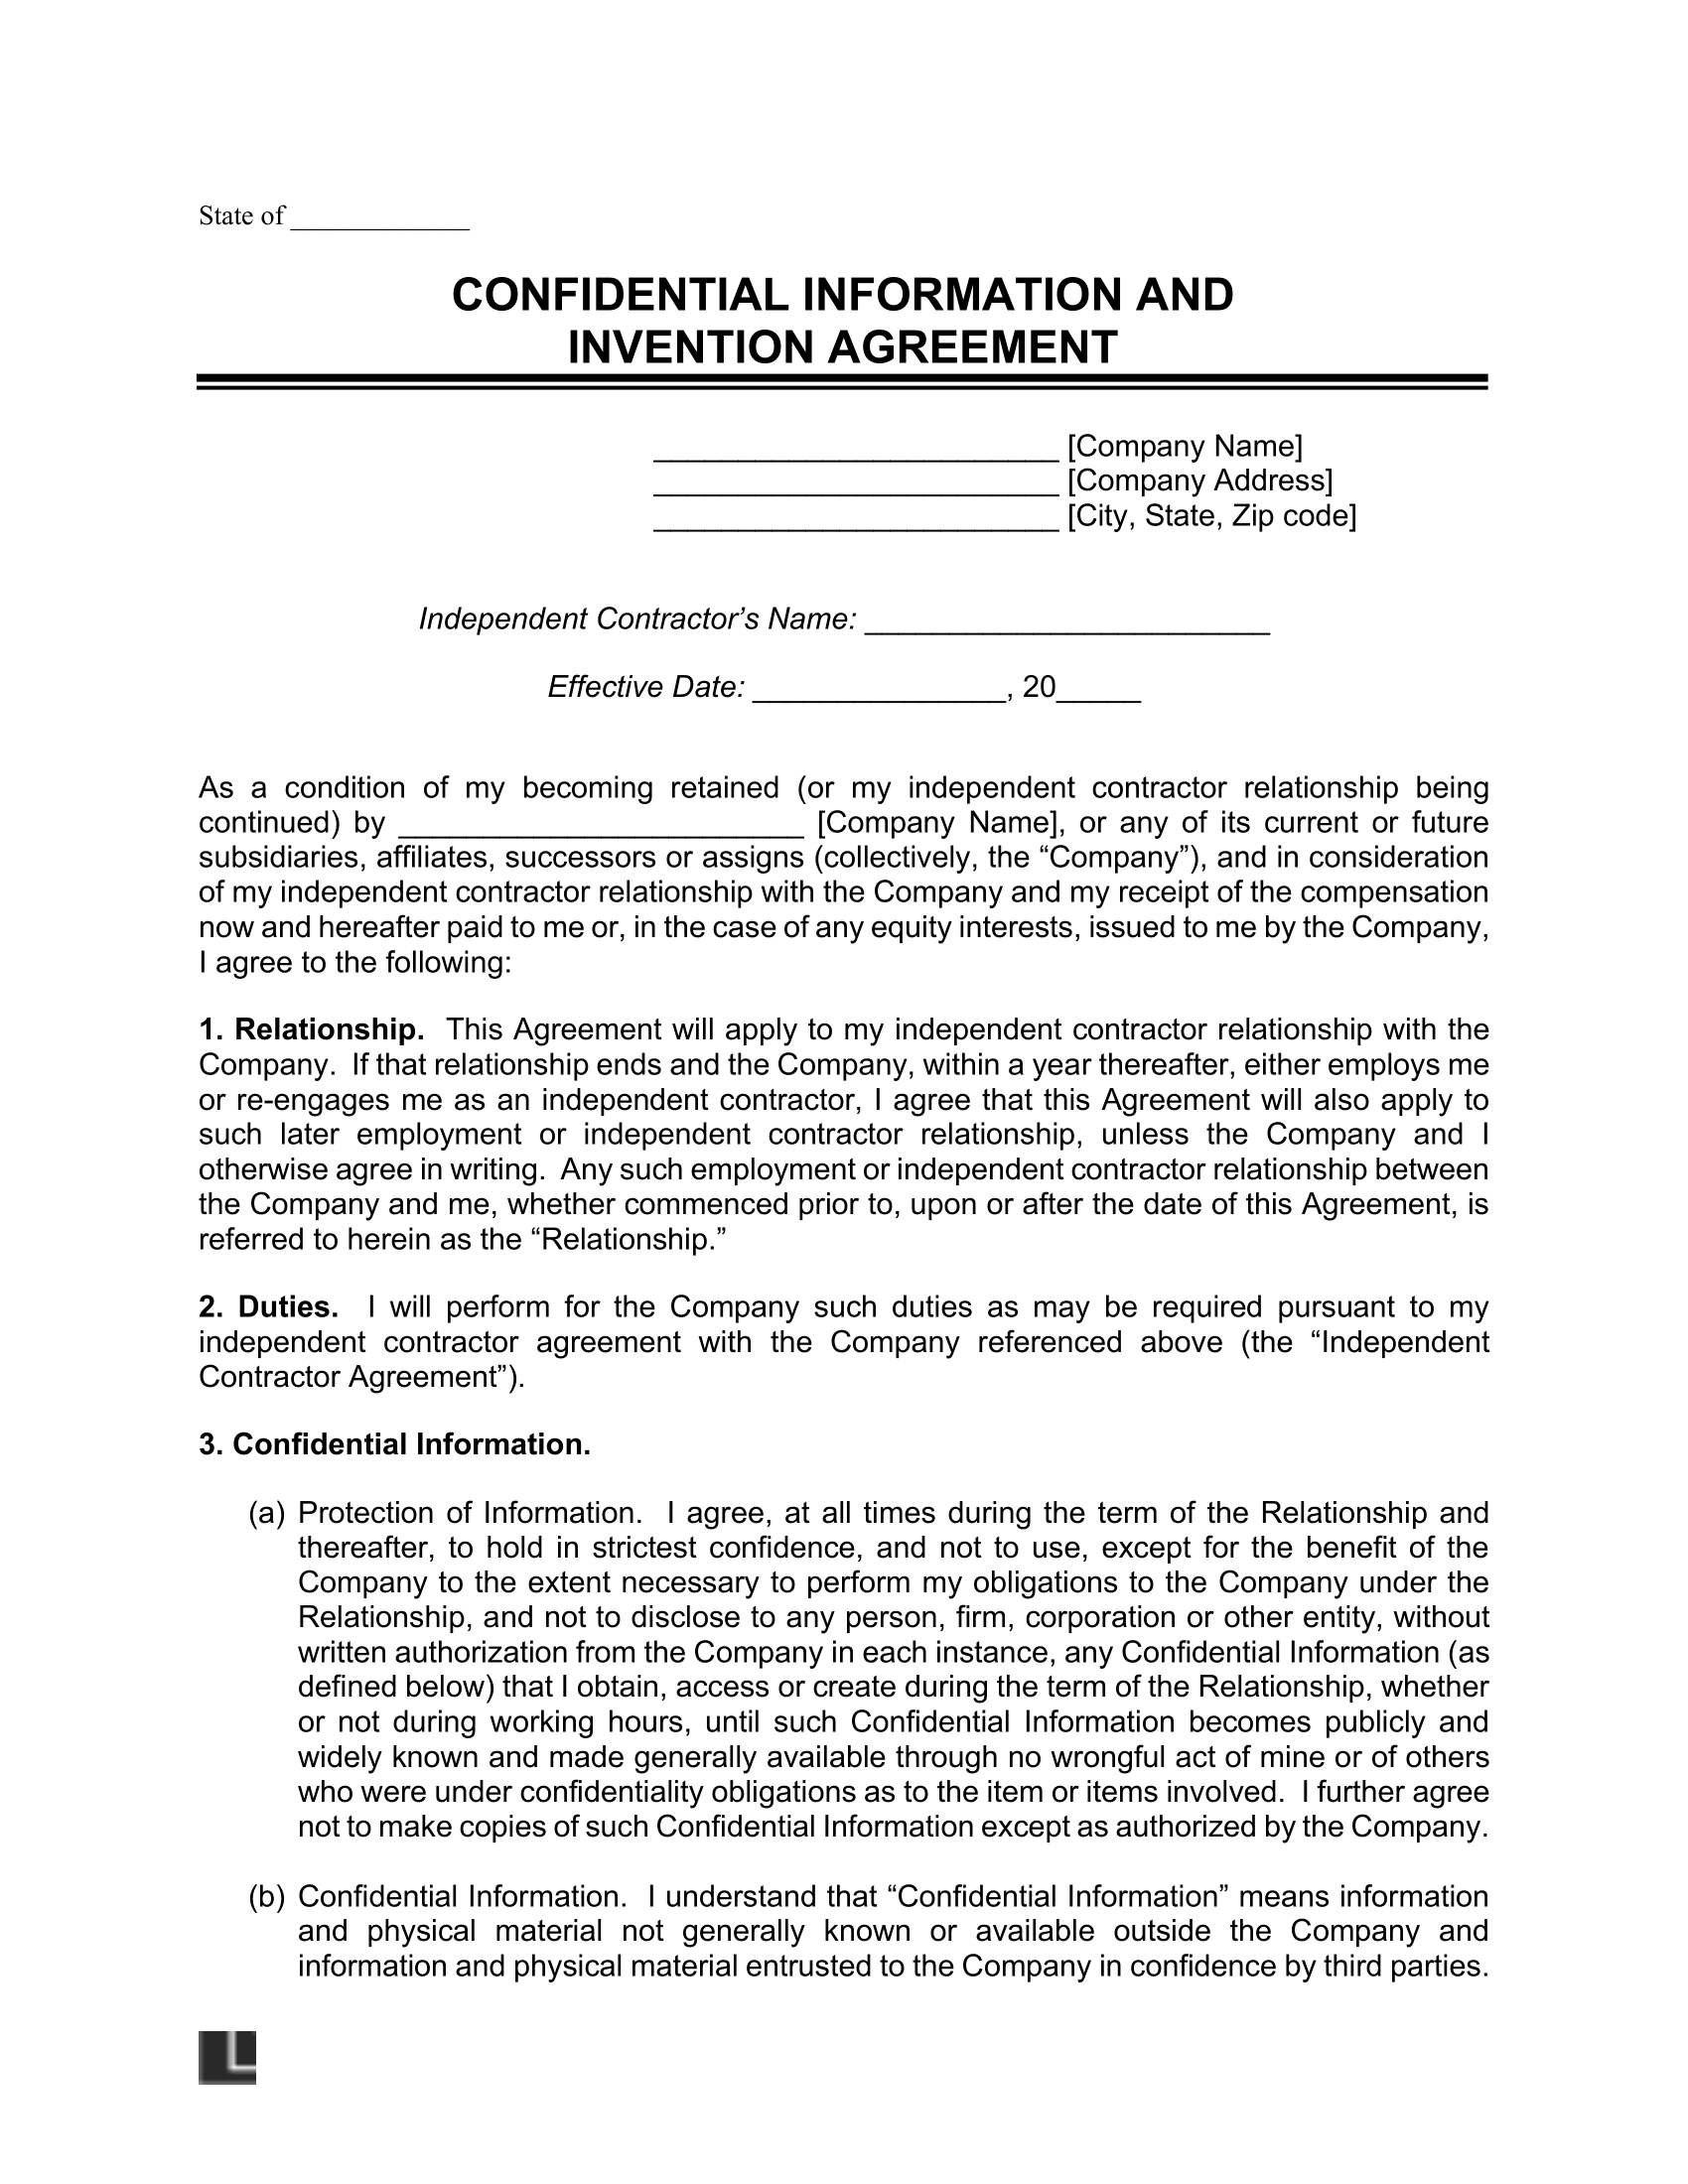 Free Confidential Information Inventions Assignment (CIIA) Agreement